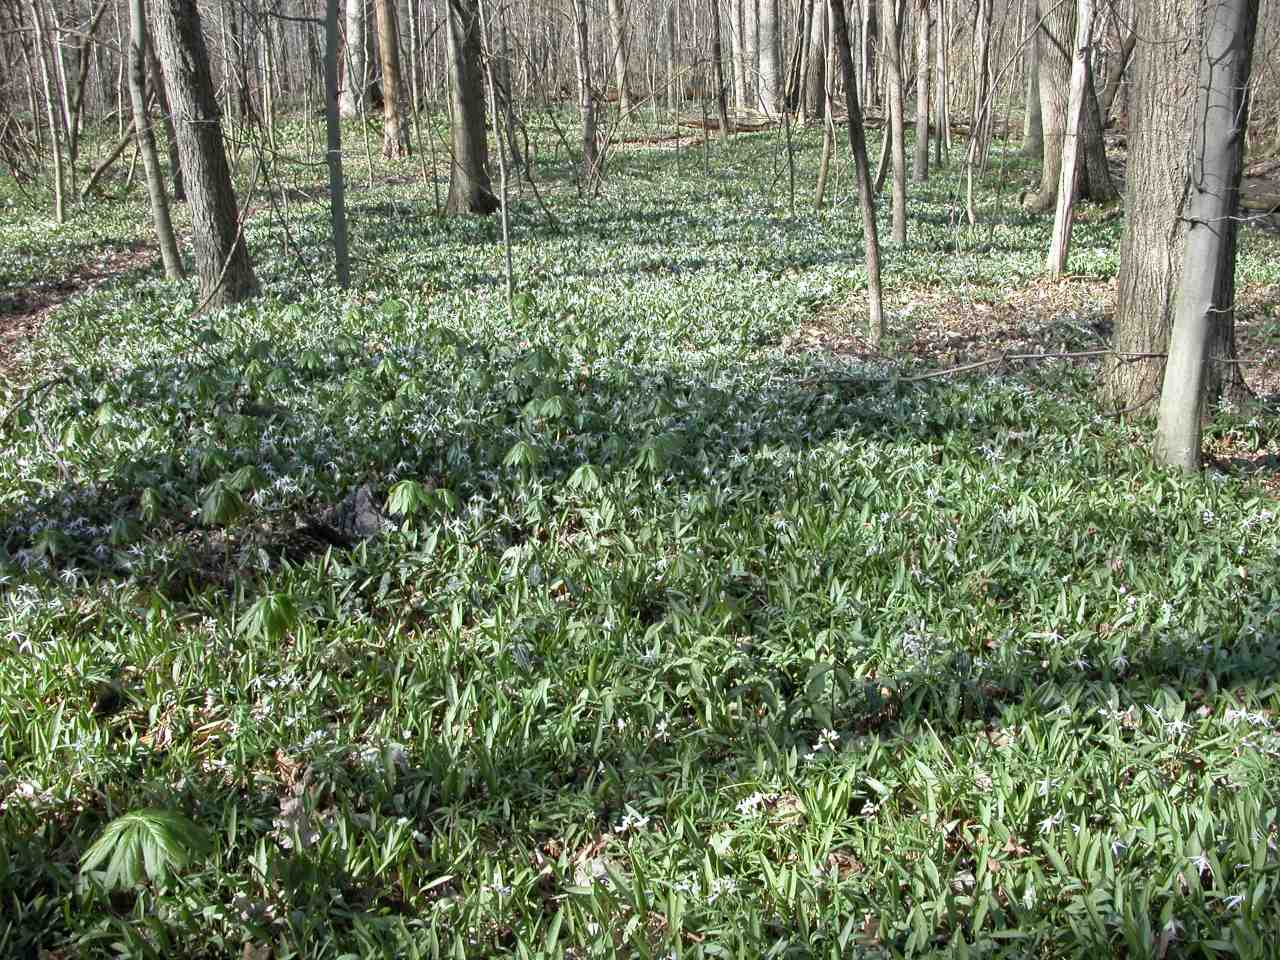 Mottle-leaved white trout lilies